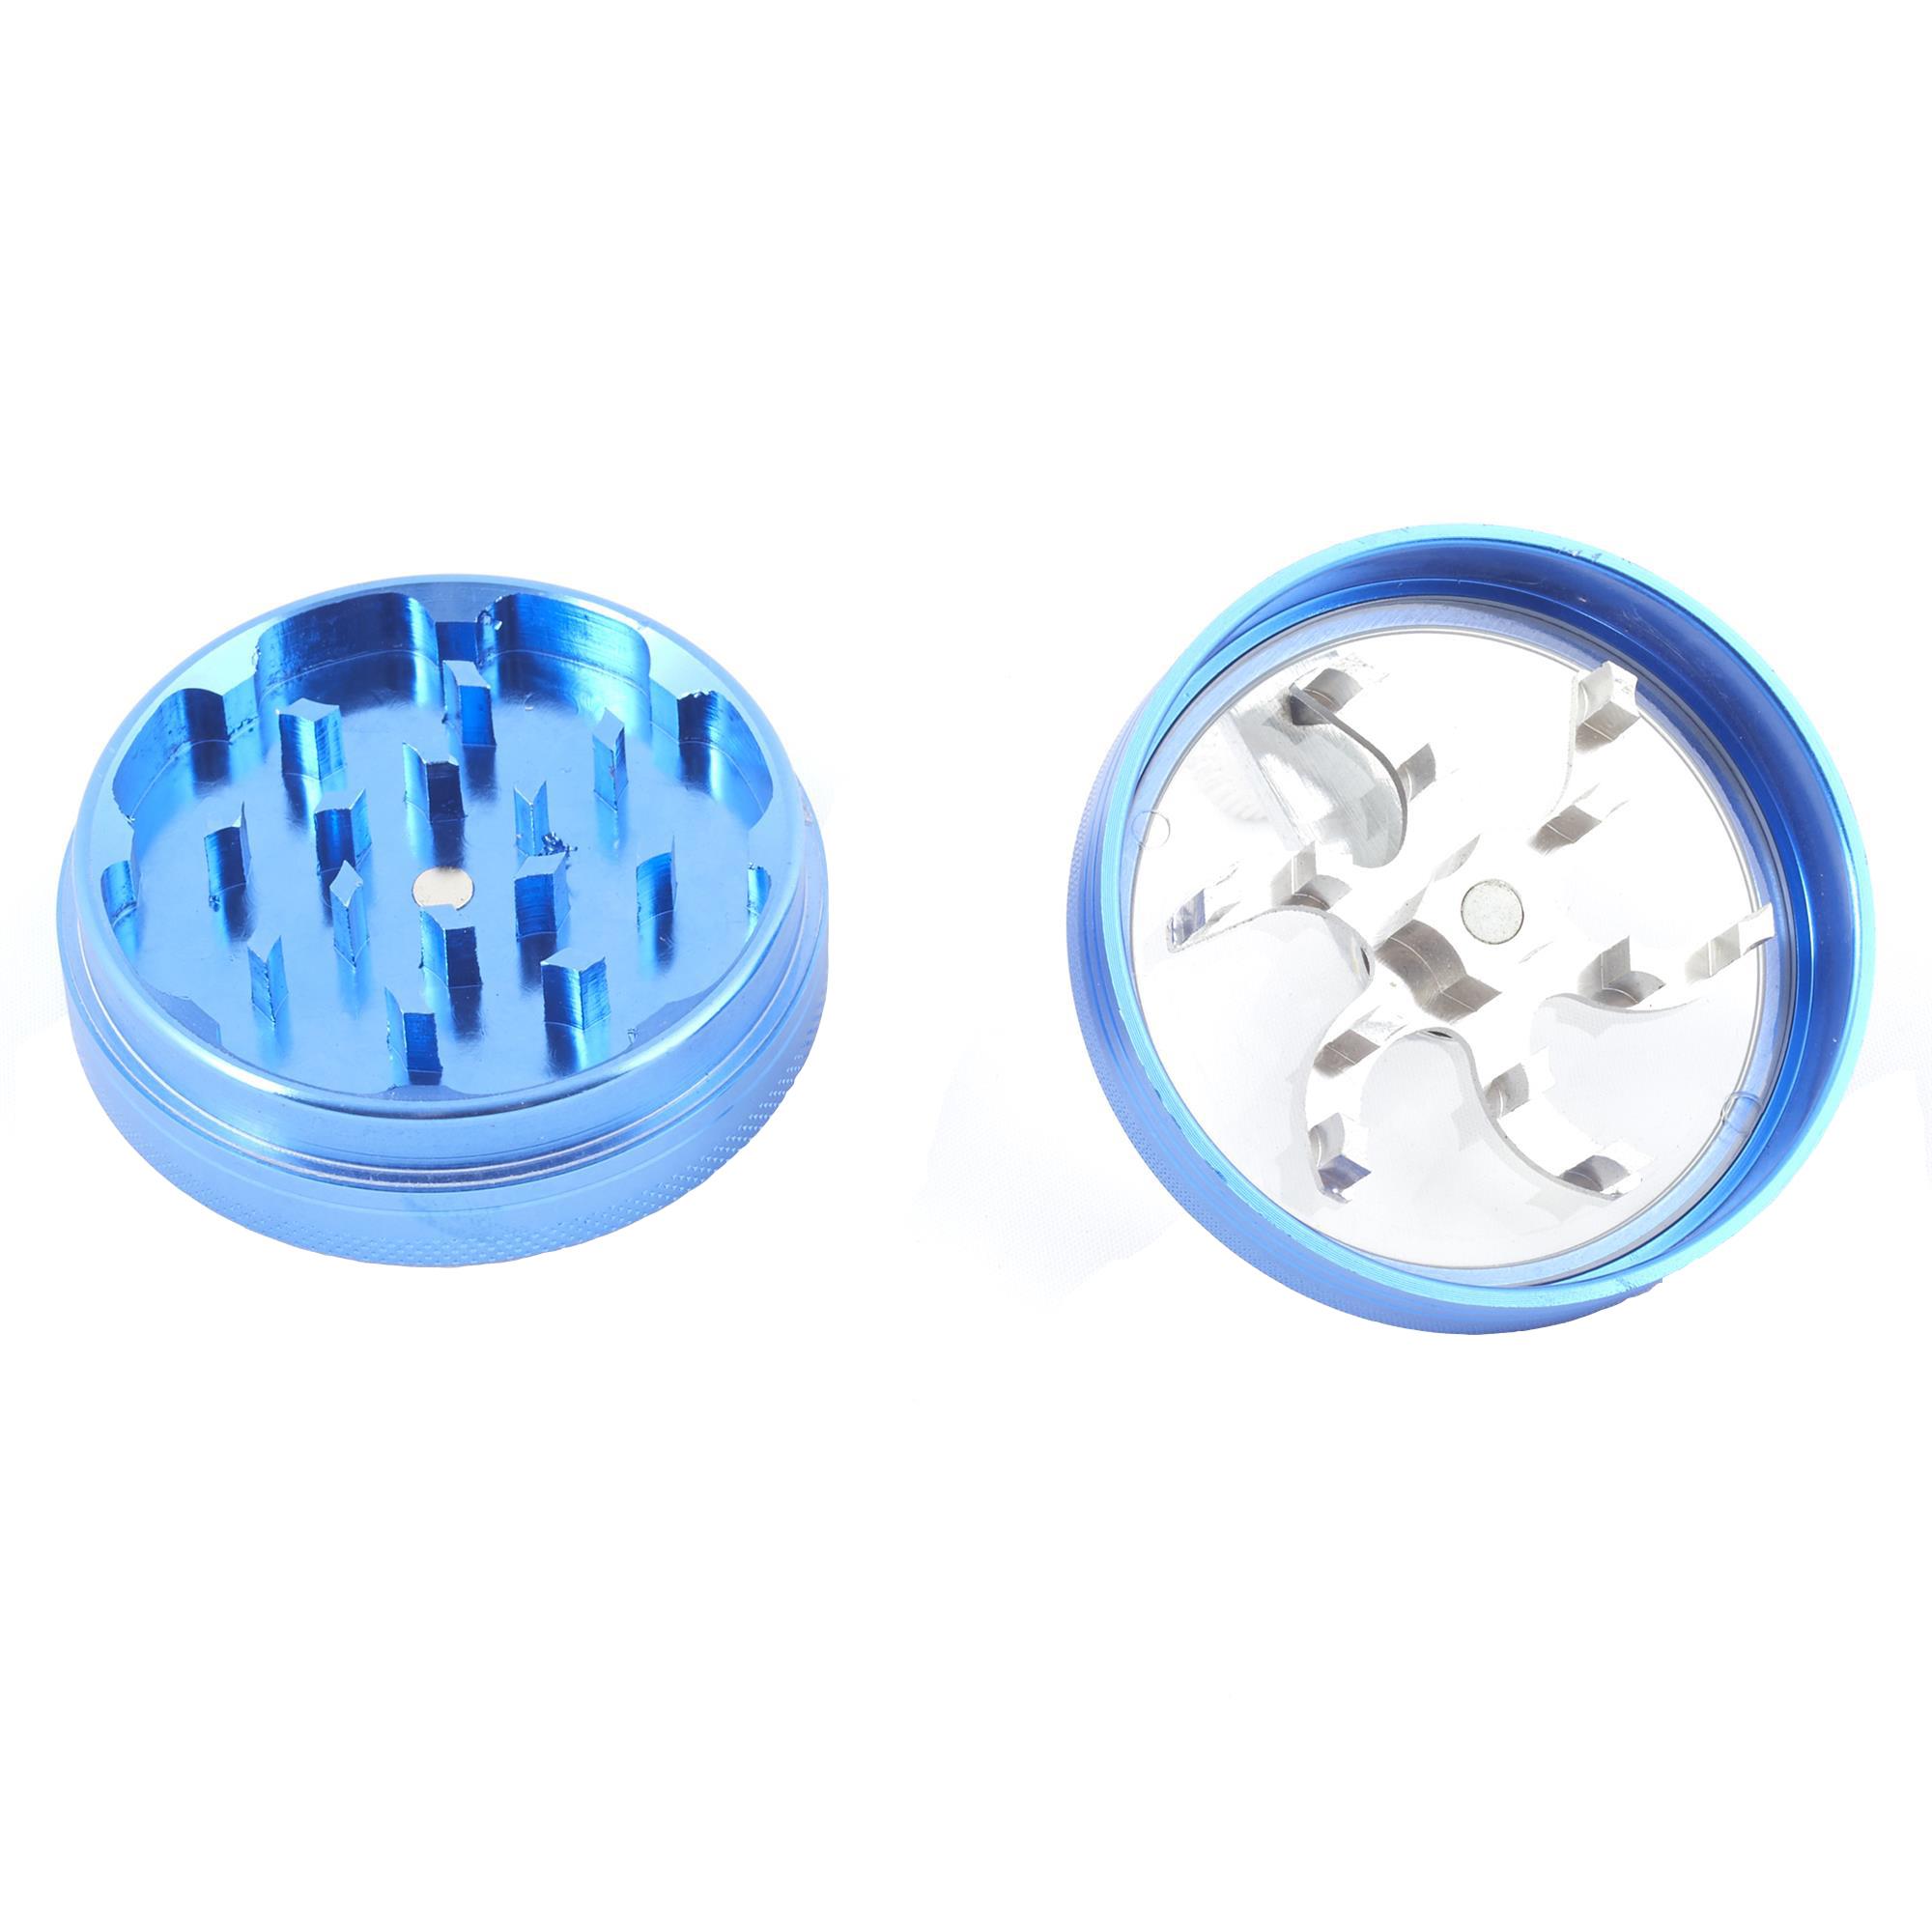 WIDE BLUE ROTARY GRINDER